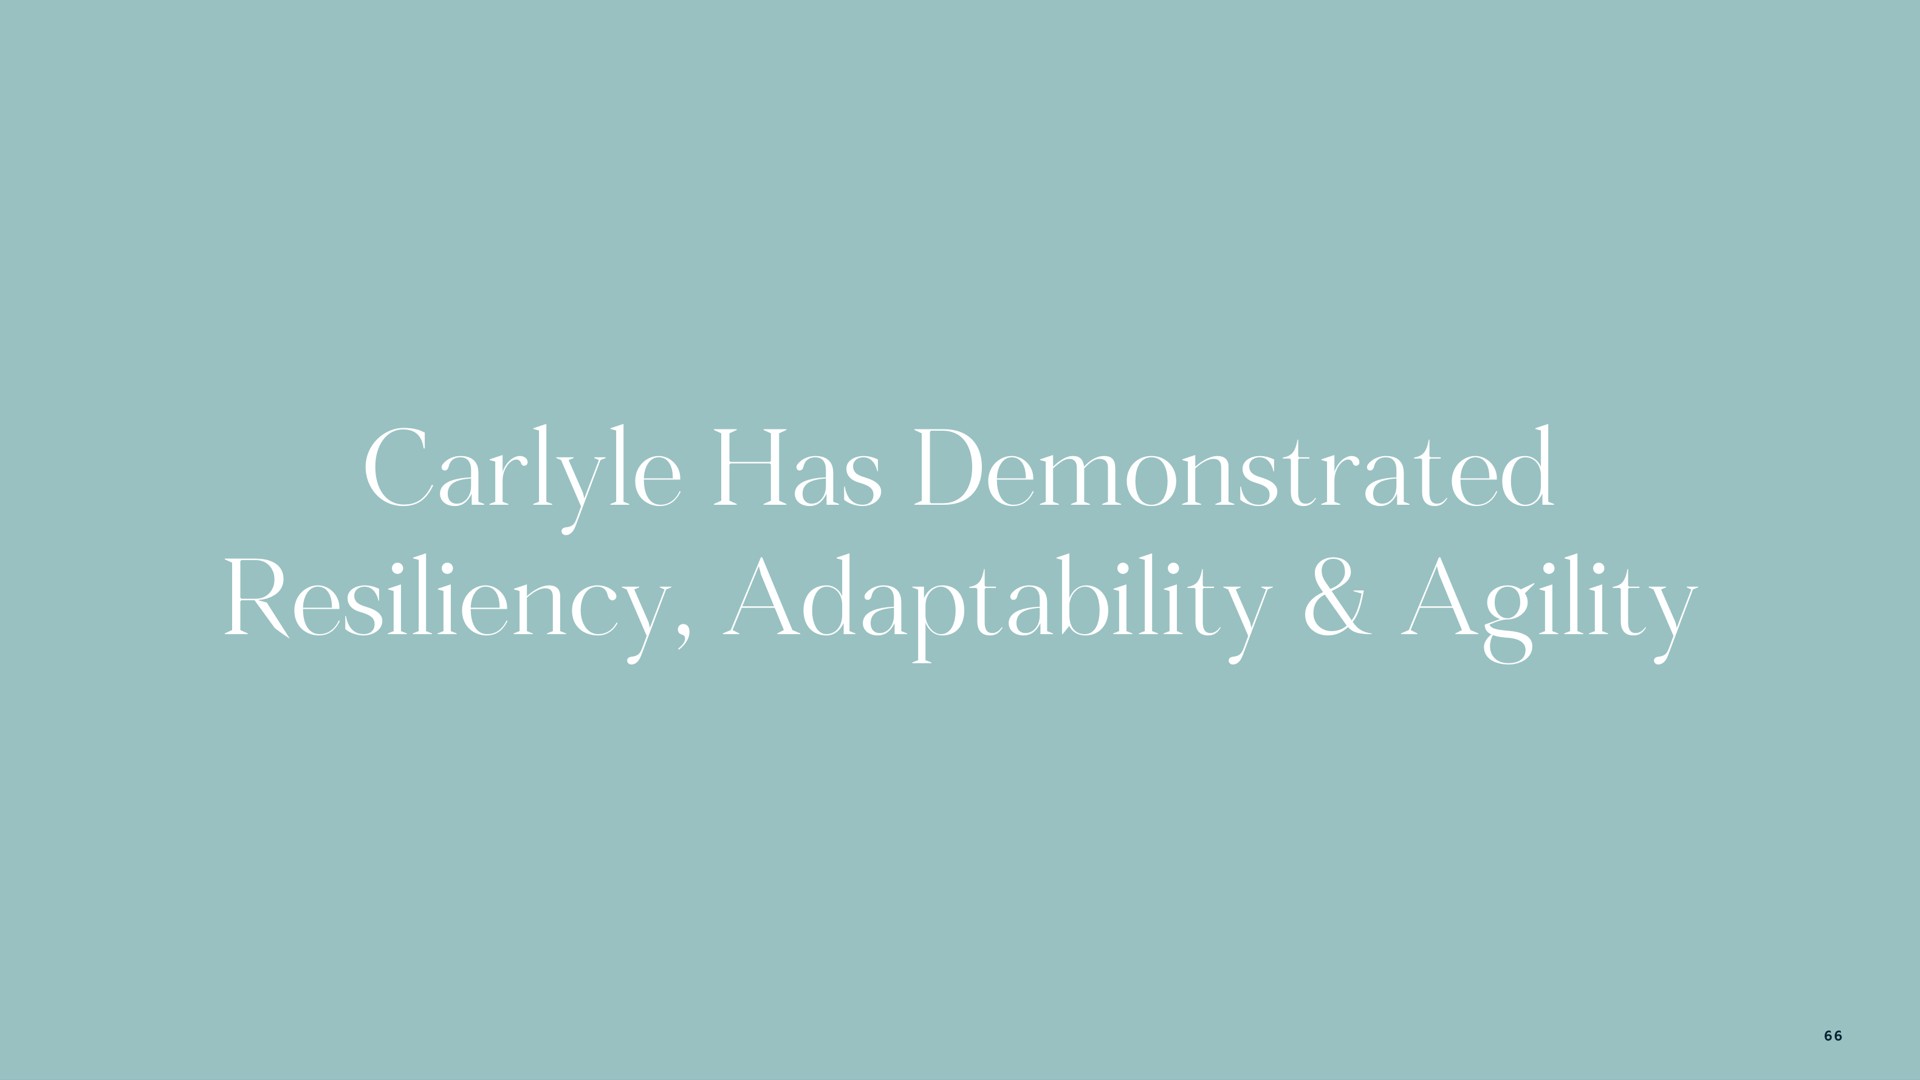 has demonstrated resiliency adaptability agility | Carlyle